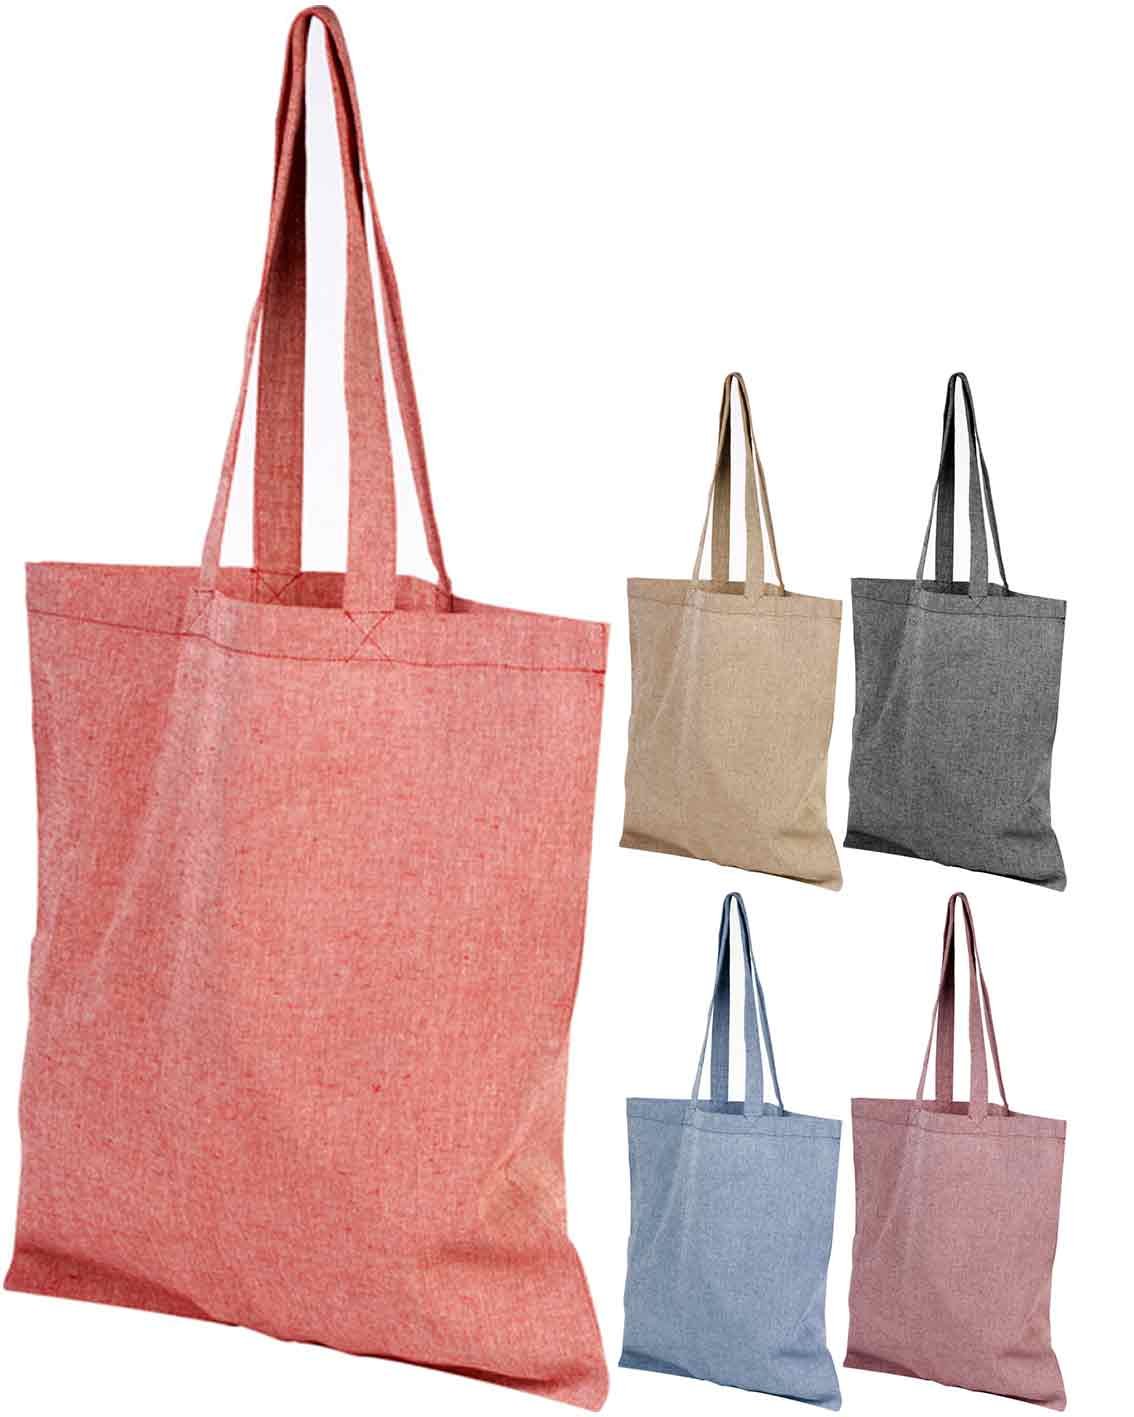 Group image of Pheebs Branded Recycled Tote Bags. Available in 5 Colours from The Promobag Warehouse